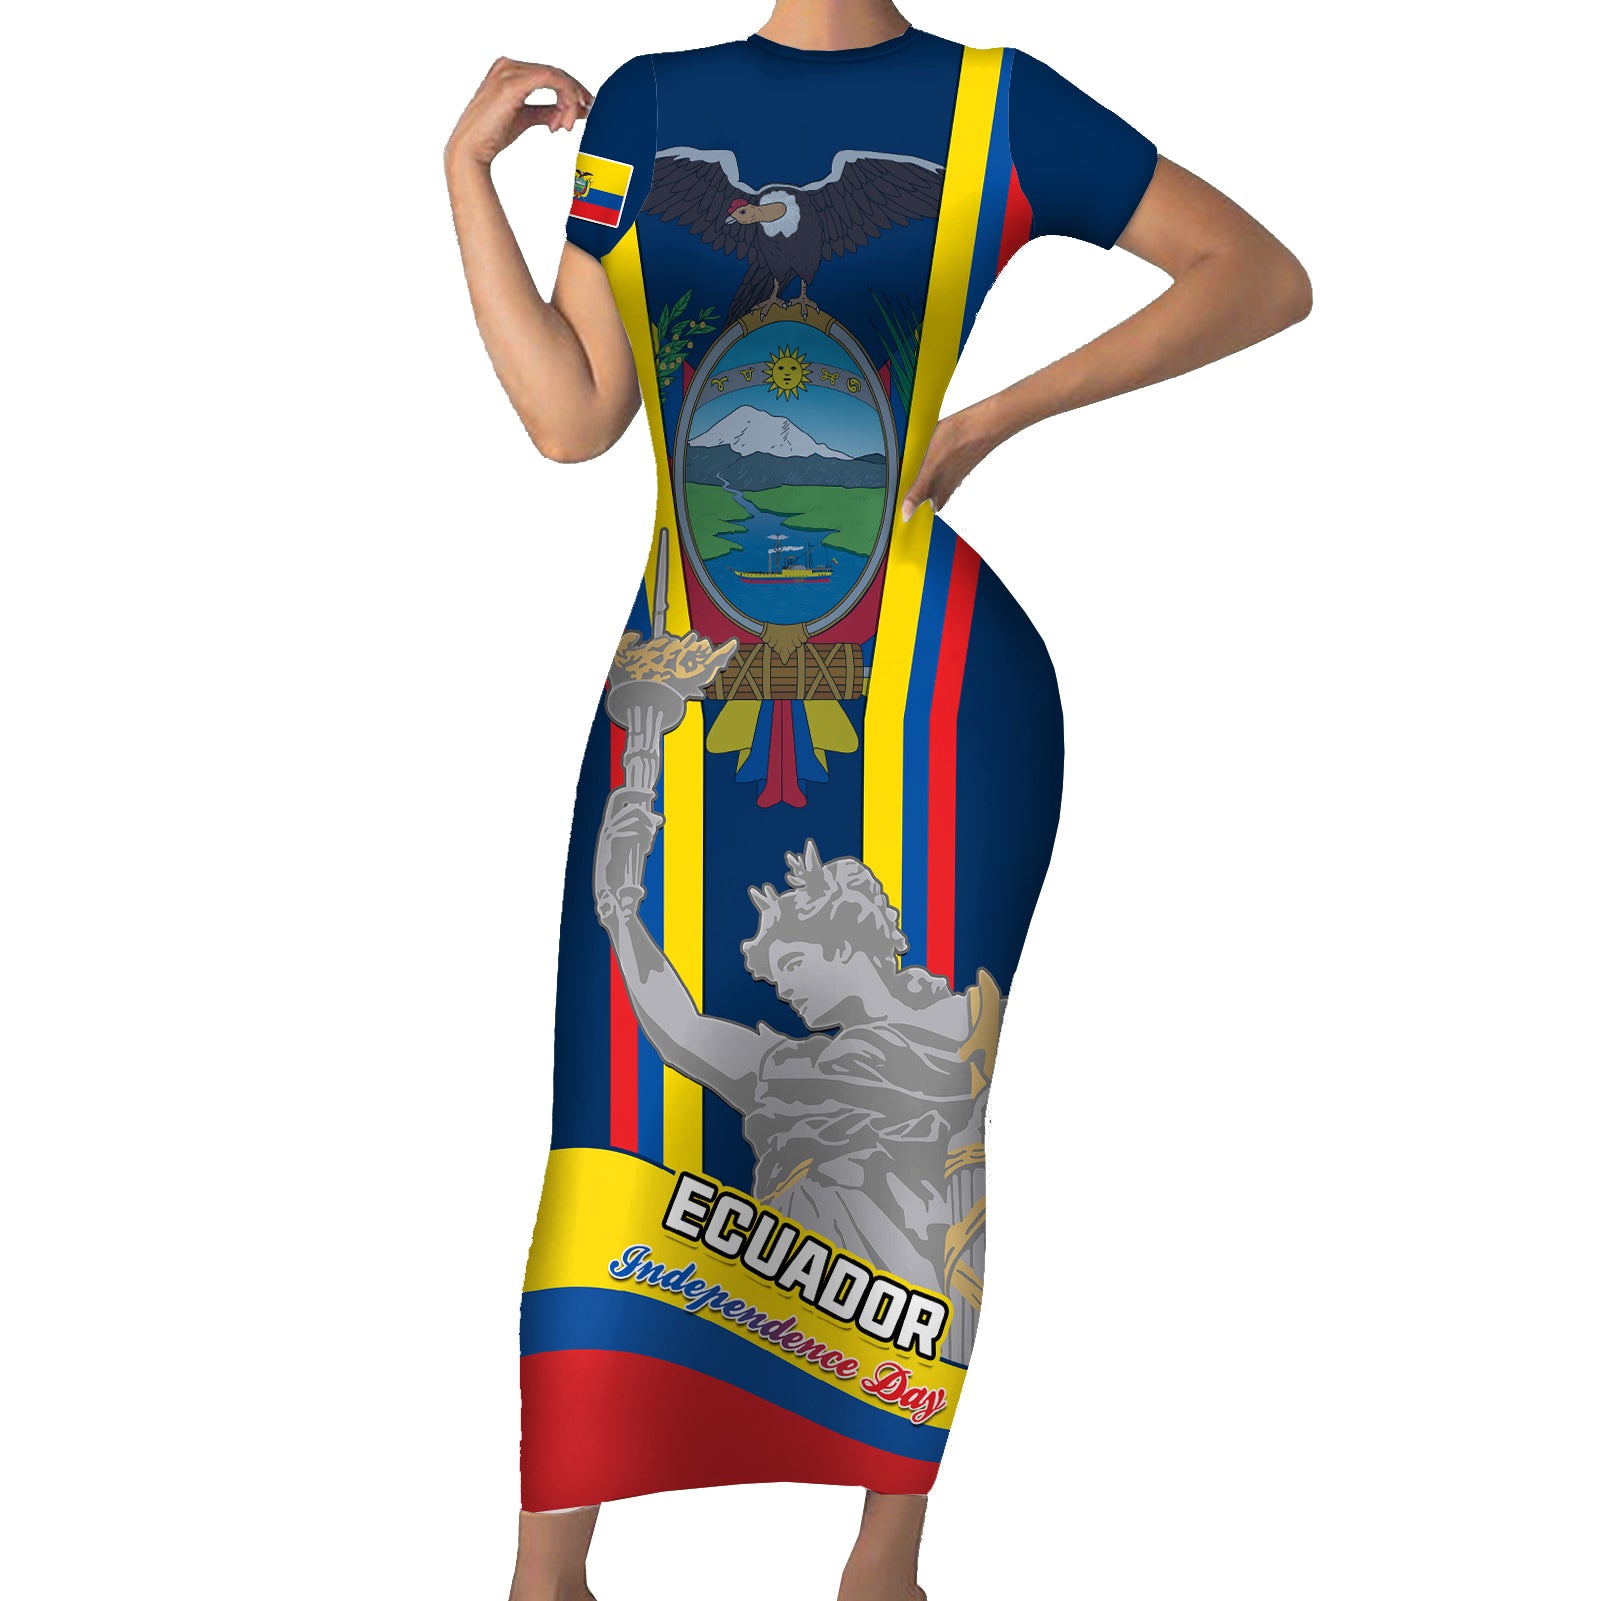 ecuador-independence-day-short-sleeve-bodycon-dress-monumento-a-la-independencia-quito-10th-august